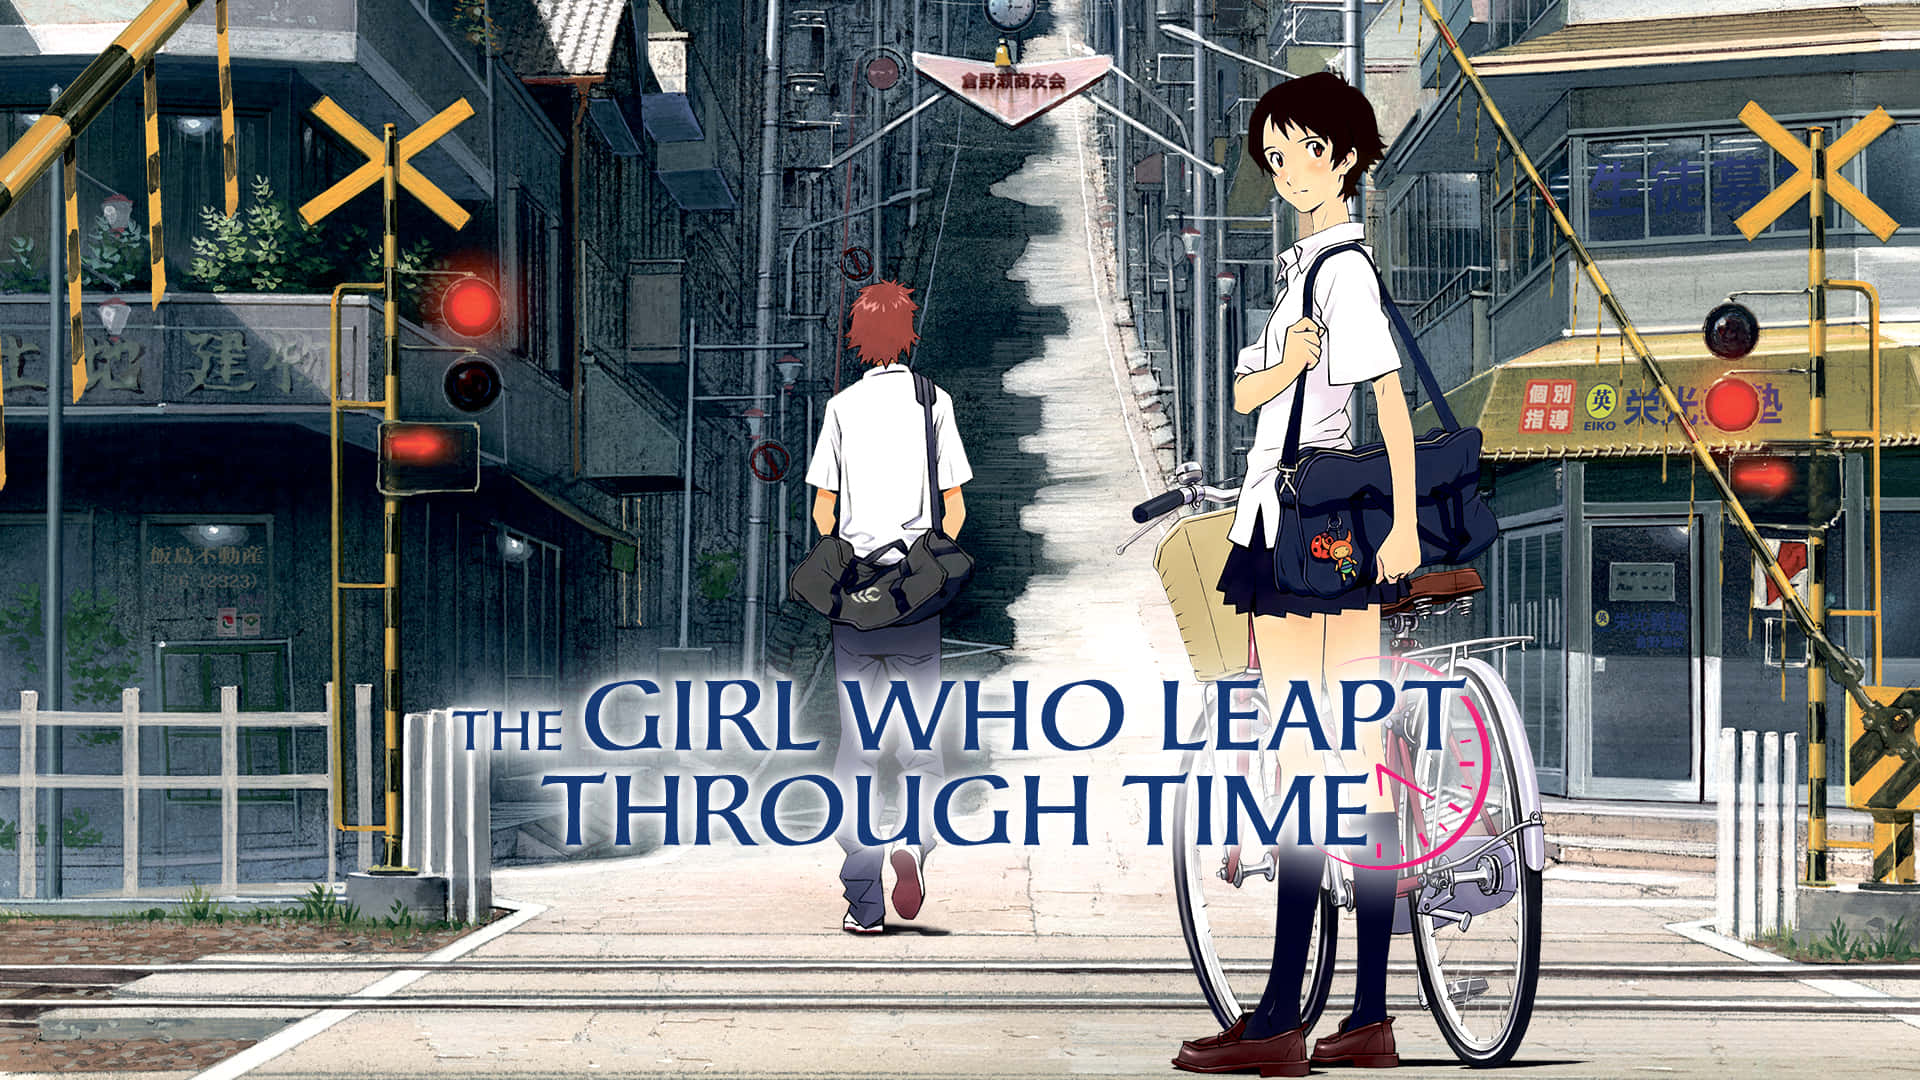 Enjoy the magical journey of Makoto as she time travels in The Girl Who Leapt Through Time Wallpaper